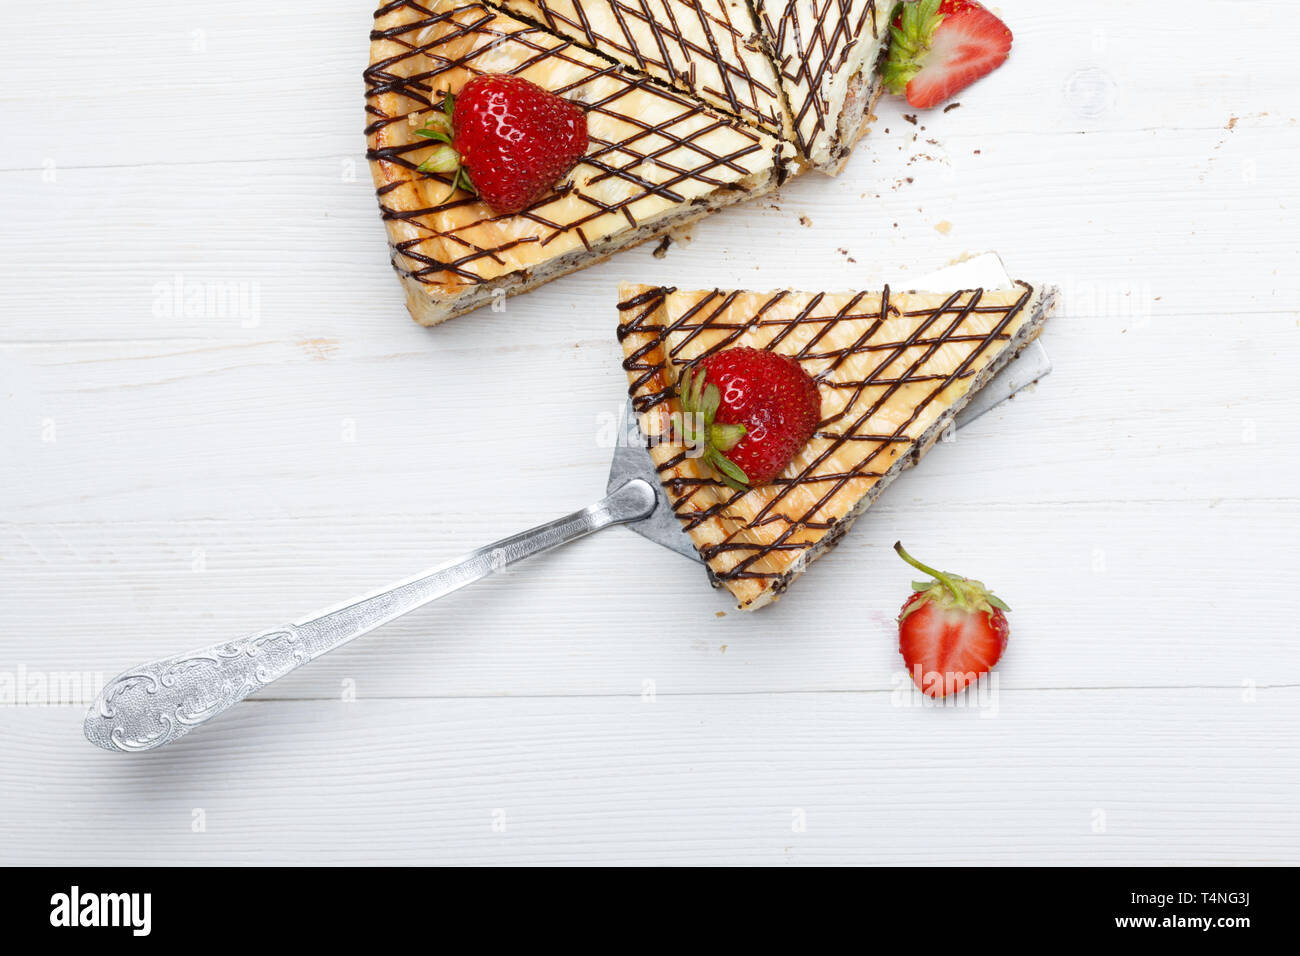 Slice of cheesecake with strawberry on cake lifter Stock Photo